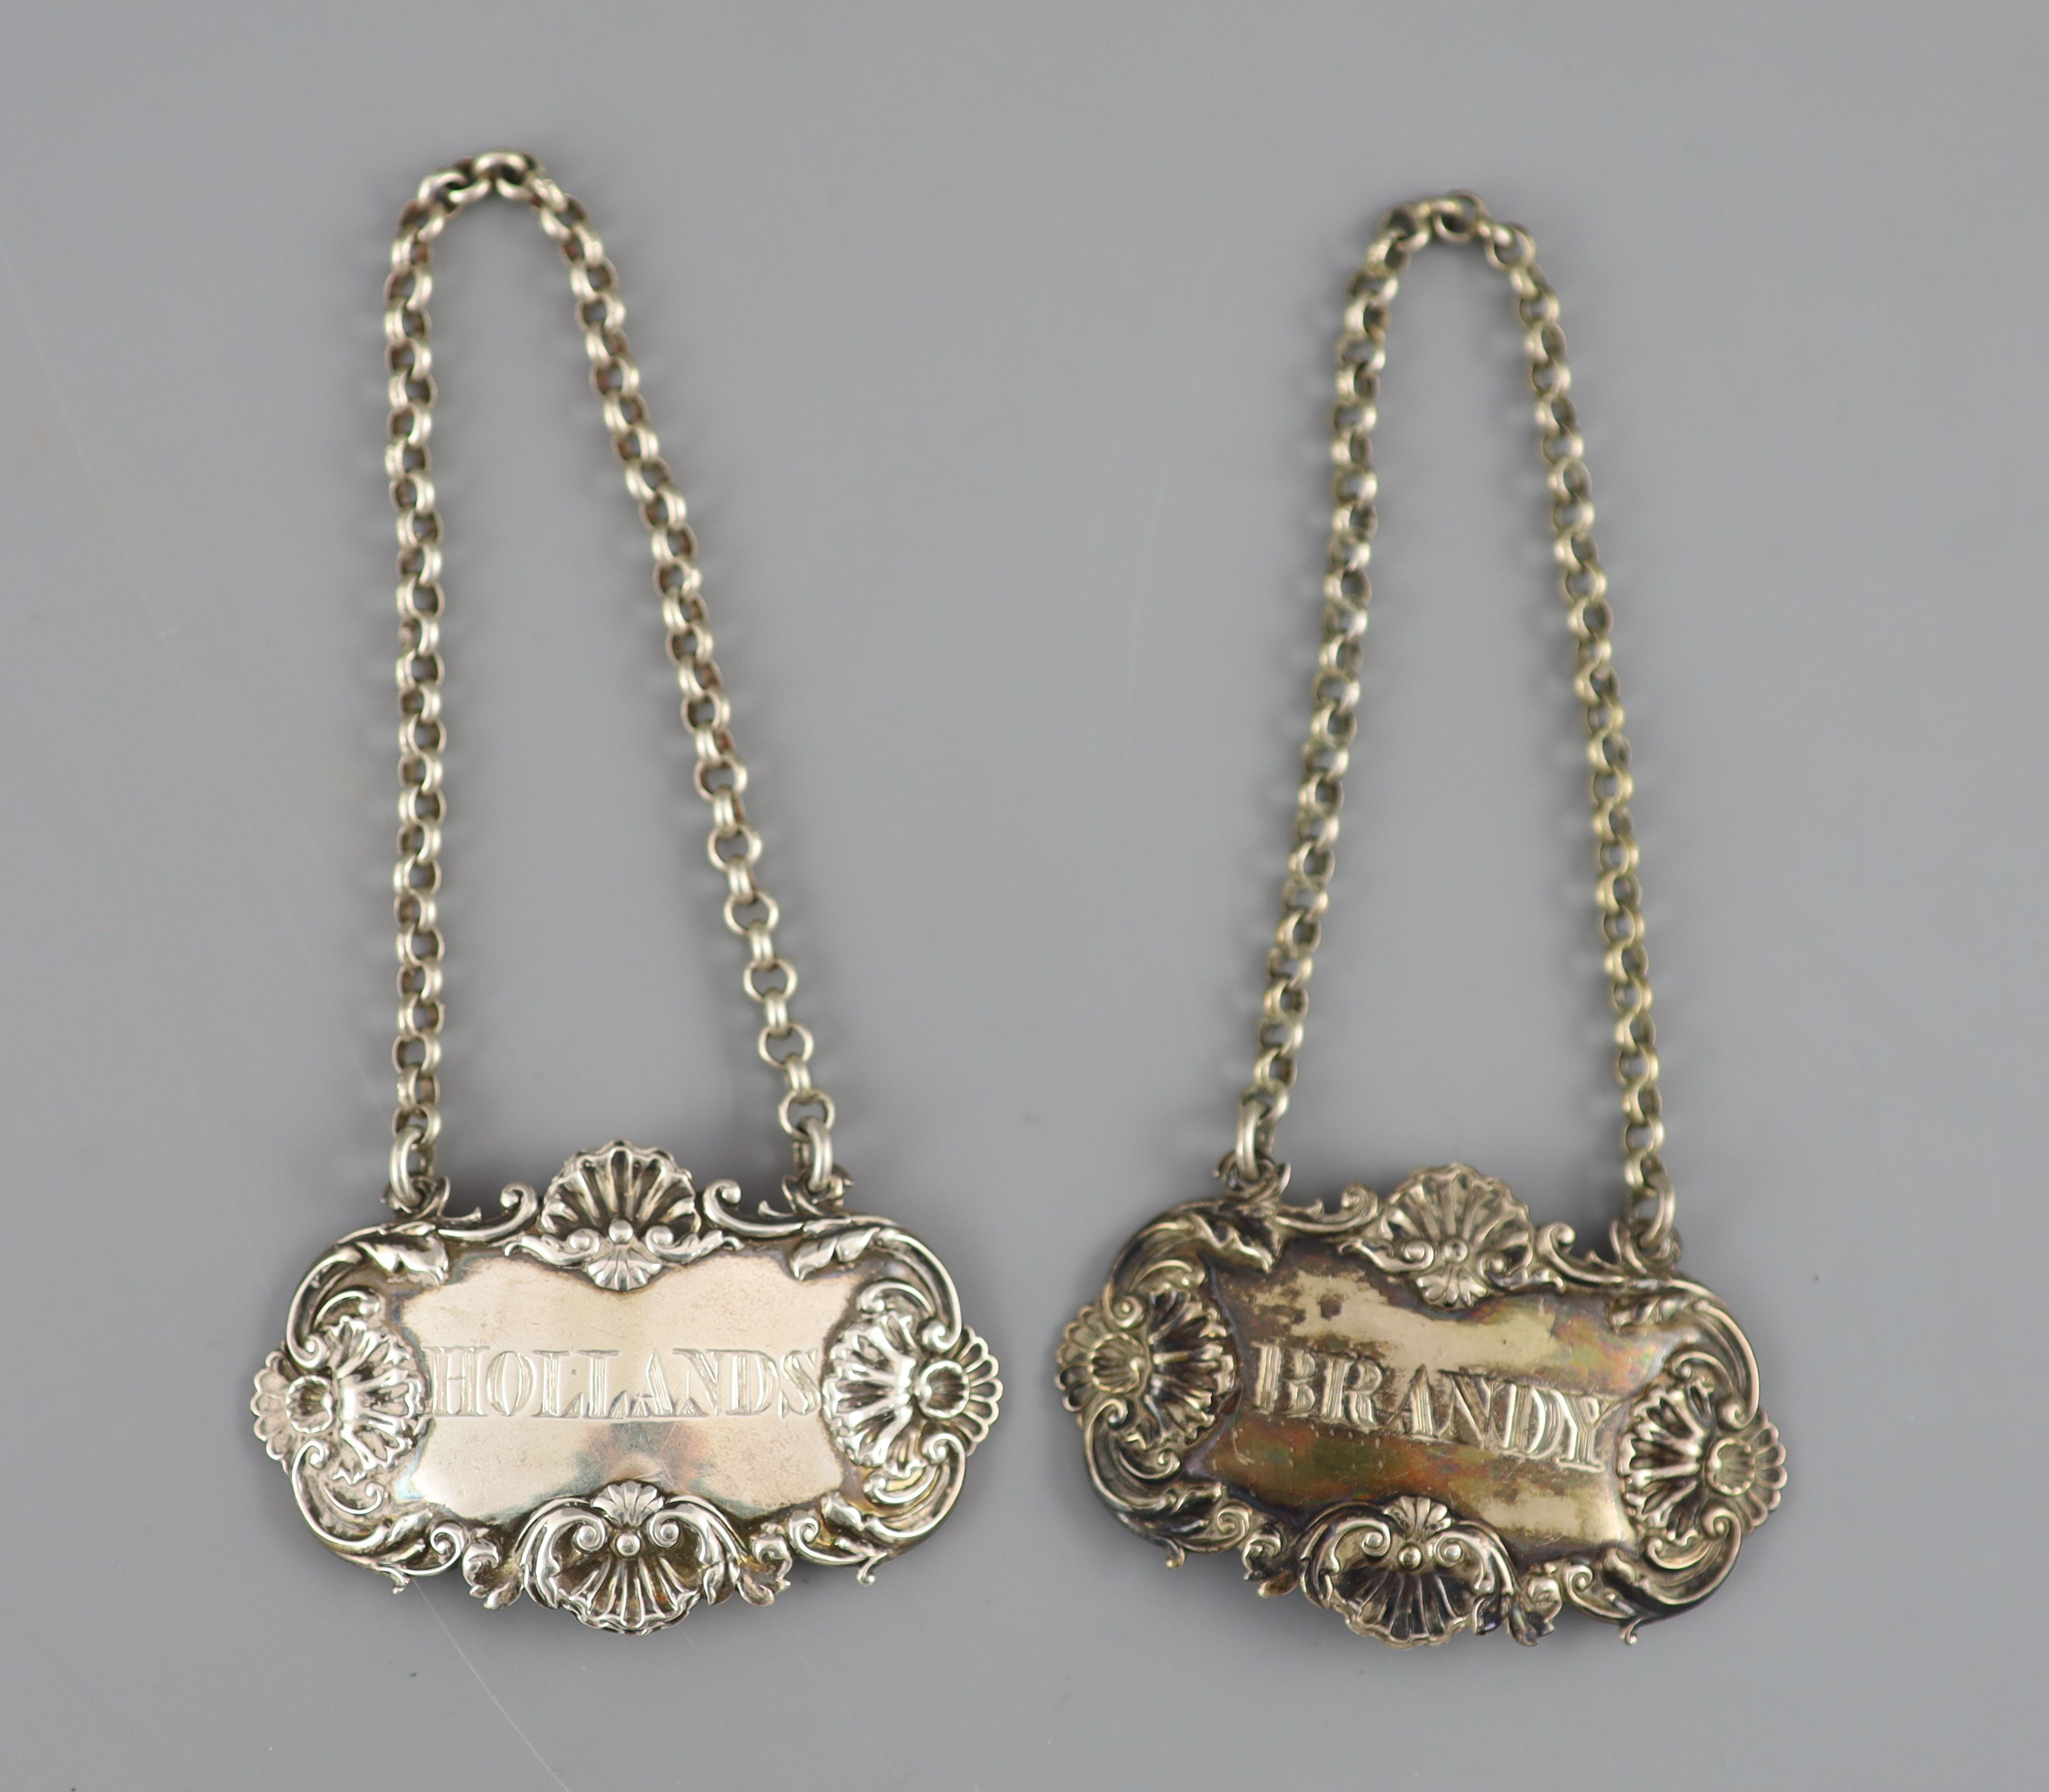 A pair of George IV silver wine labels Hollands & Brandy by Paul Storr, London, 1827, 64mm & 2 others.